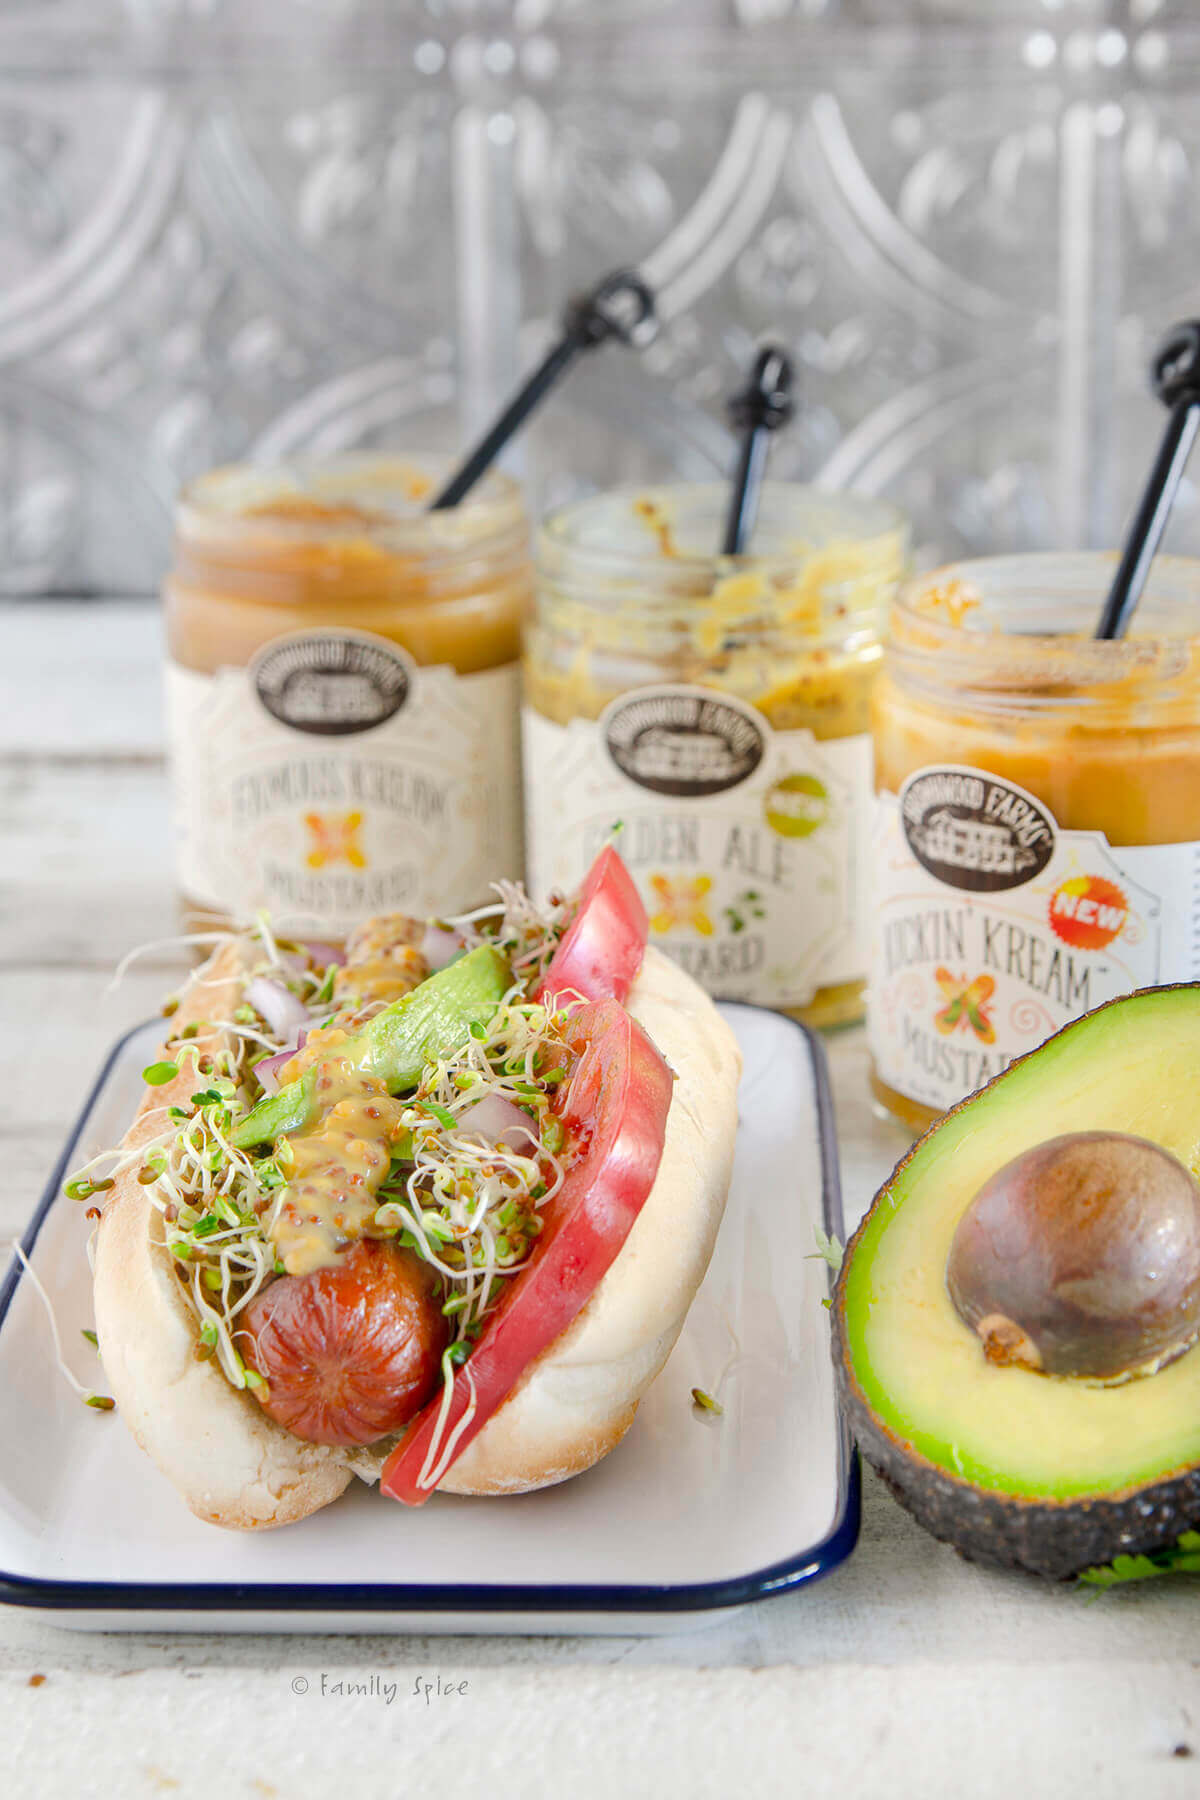 A hot dog with tomatoes, avocado slices and sprouts with a halved avocado and mustard jars behind it